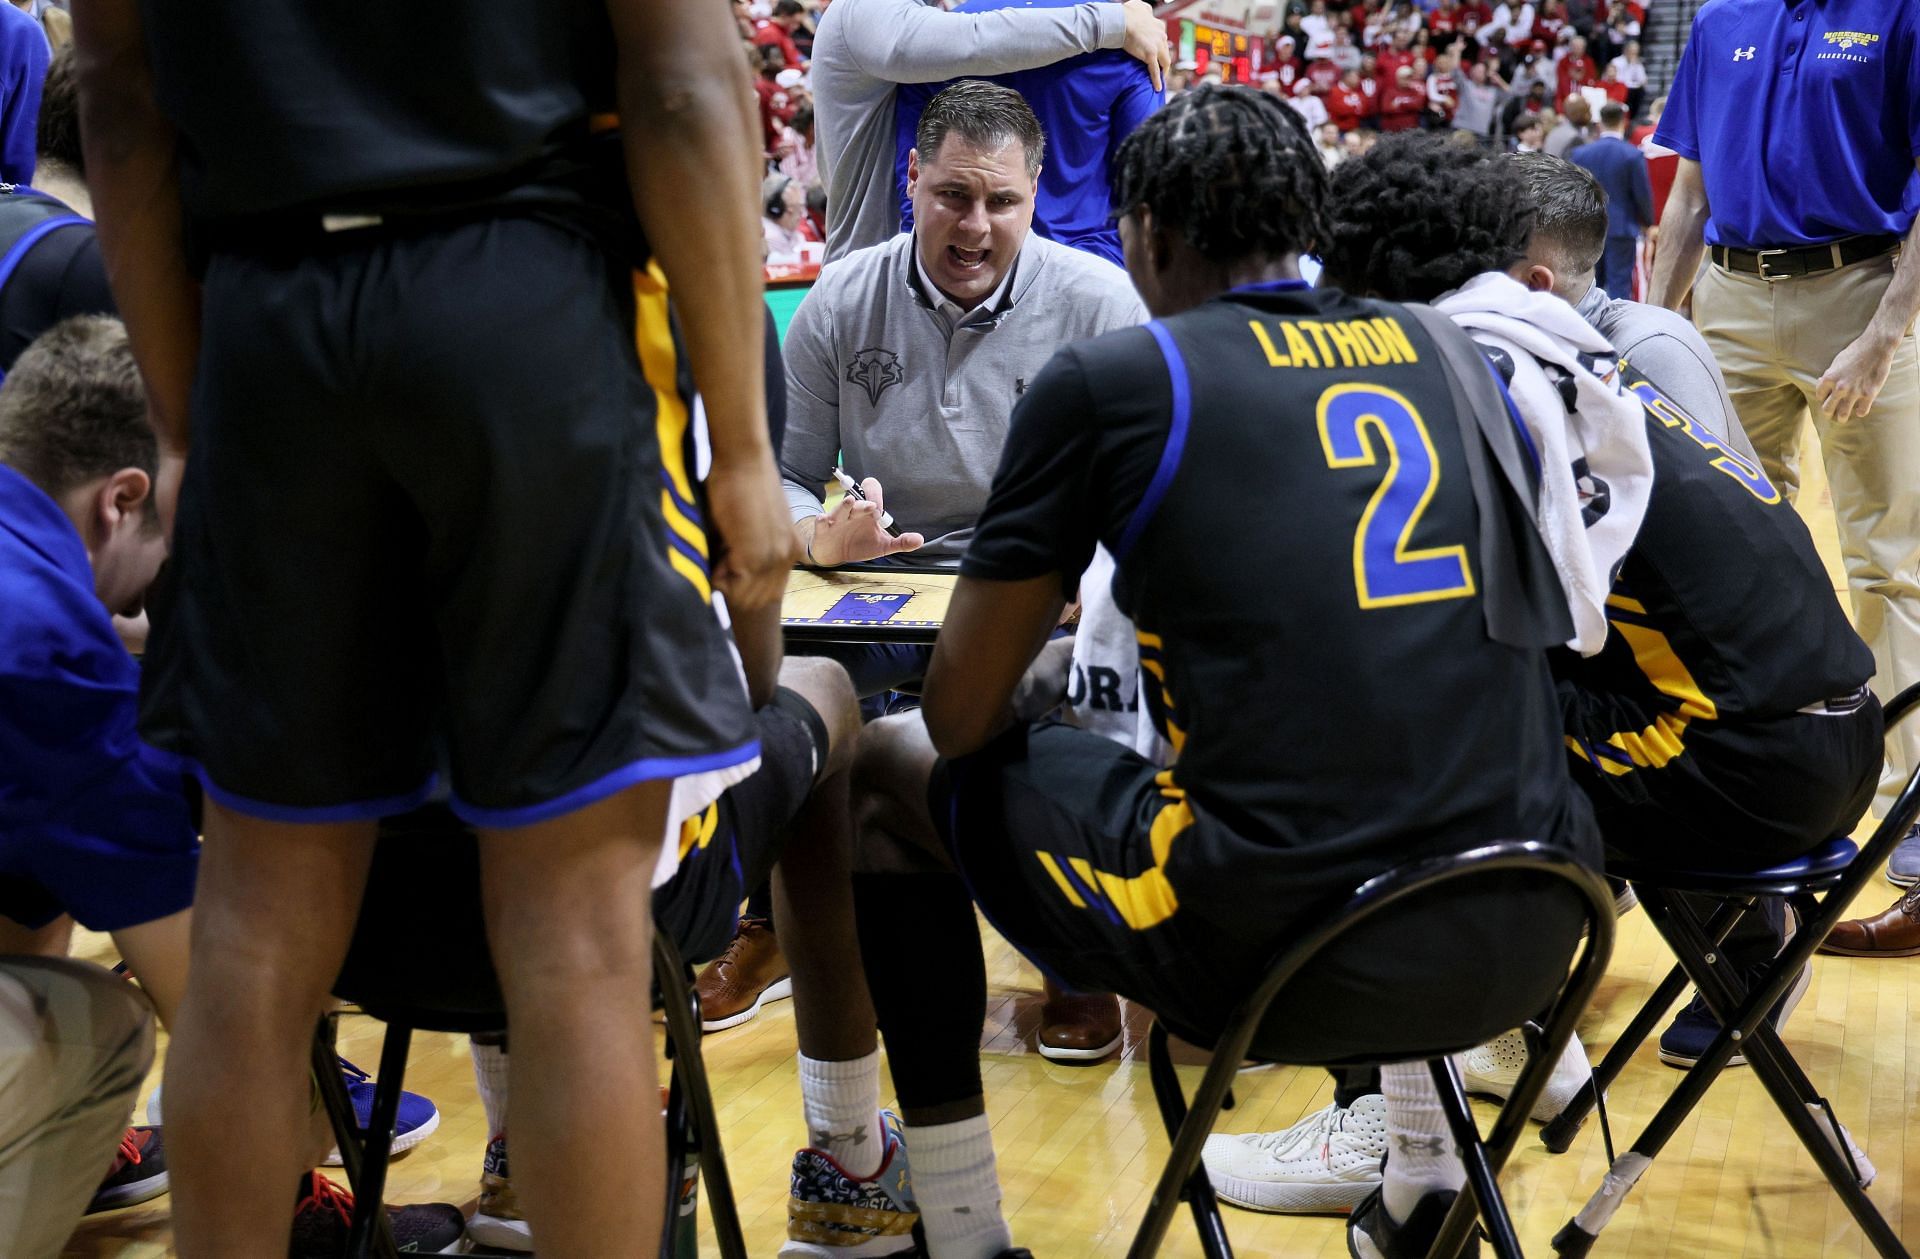 Morehead State Preston Spradlin will have more work to do in the NCAA Tournament after winning the Ohio Valley Conference final over Little Rock.